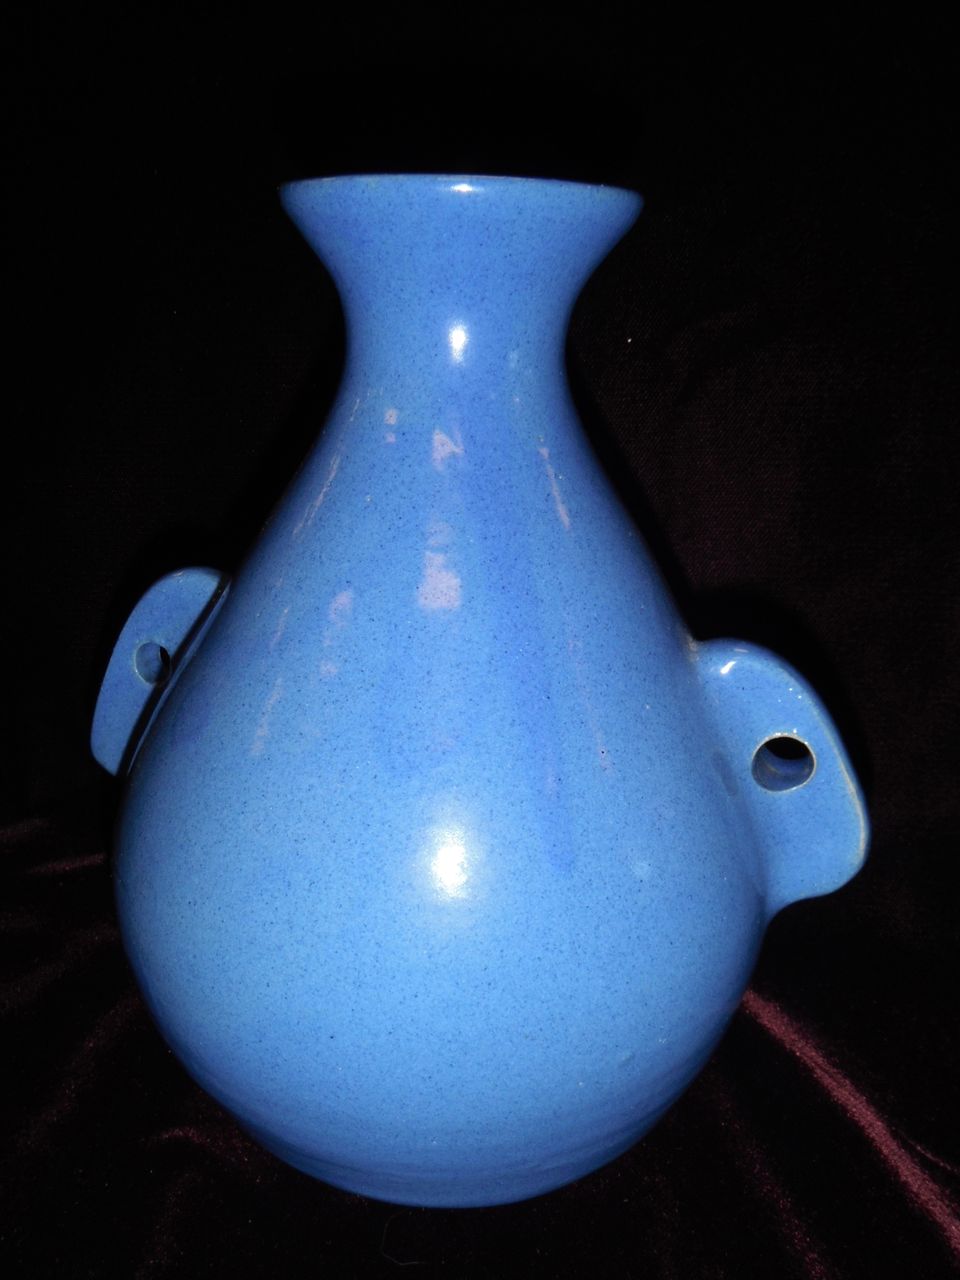 Bybee Pottery